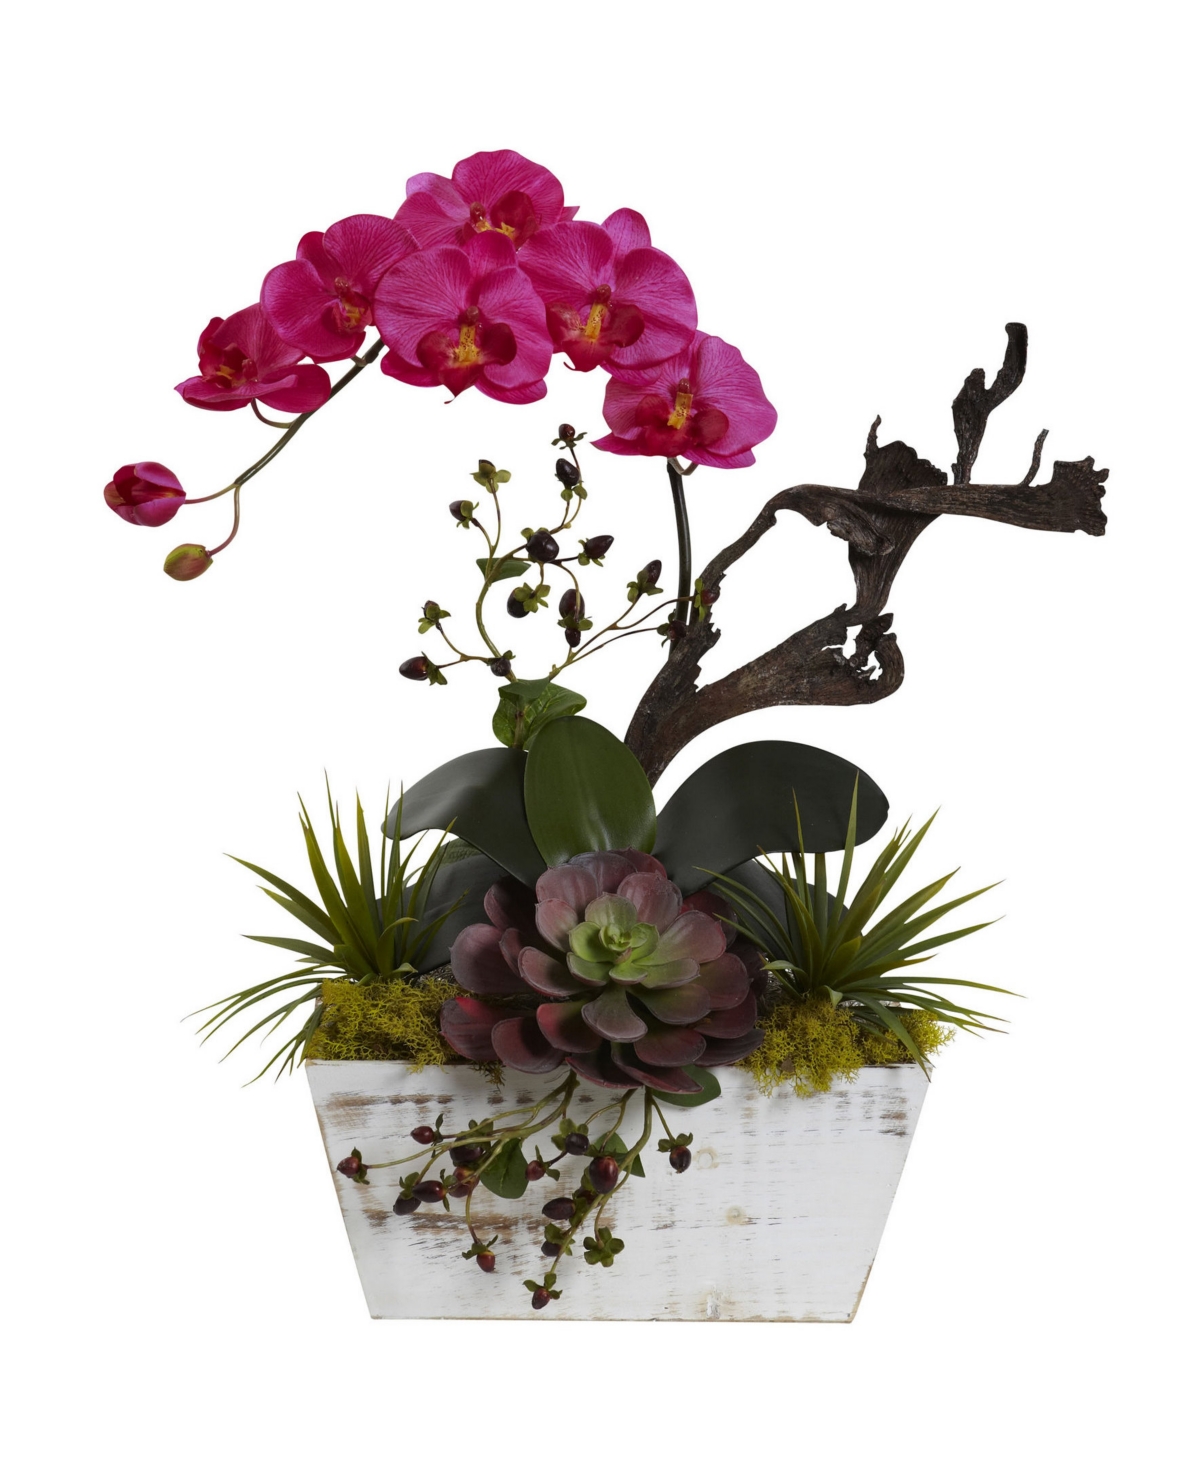 Orchid and Succulent Garden w/ White Wash Planter - Beauty Pink